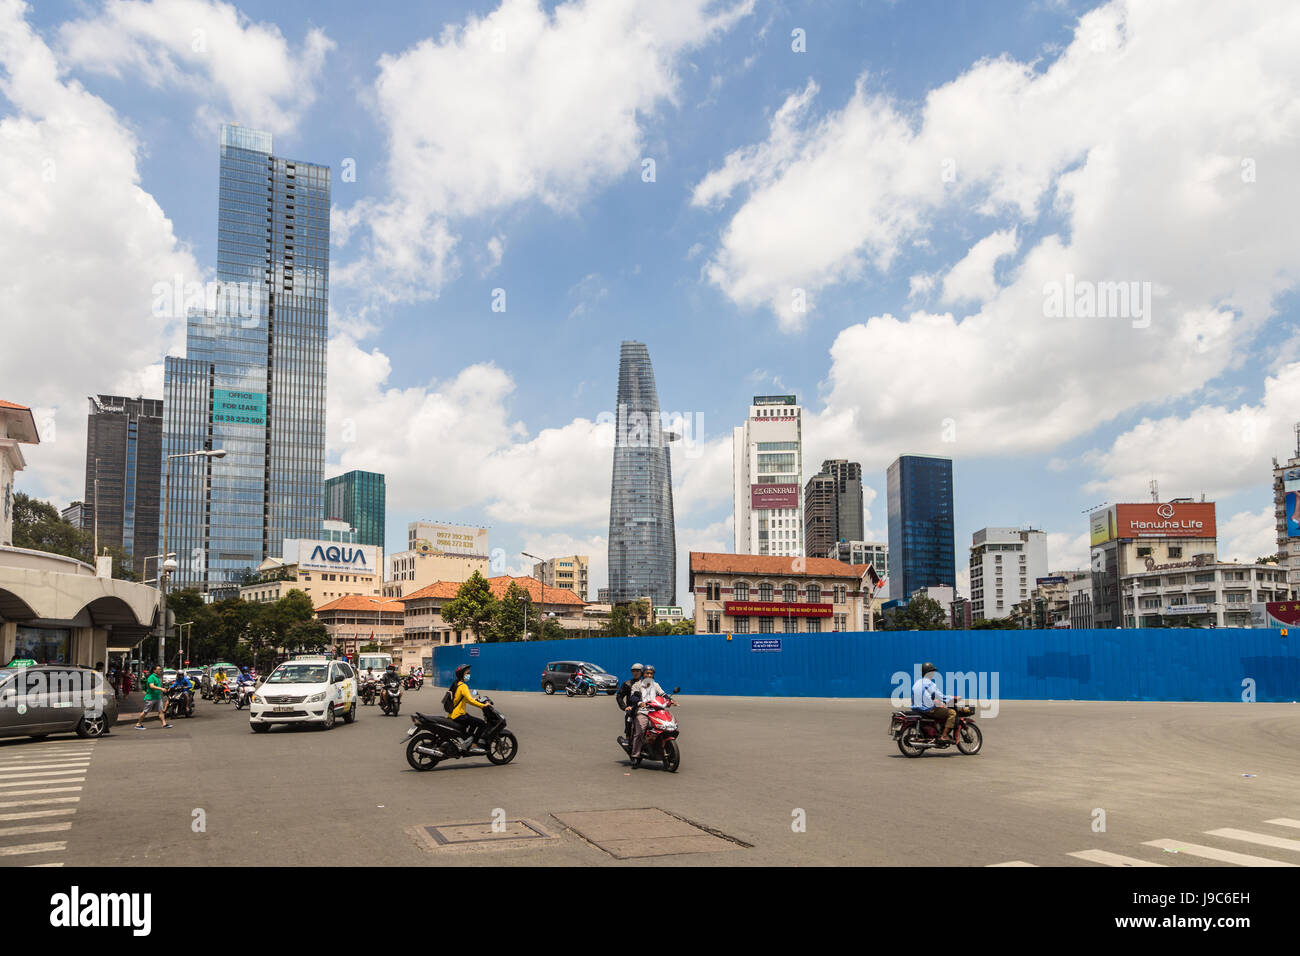 HO CHI MINH CITY, VIETNAM - APRIL 9, 2017: Cars and motorcycles drive in front of the famous Ben Thanh market in the heart of Ho Chi Minh City, the la Stock Photo